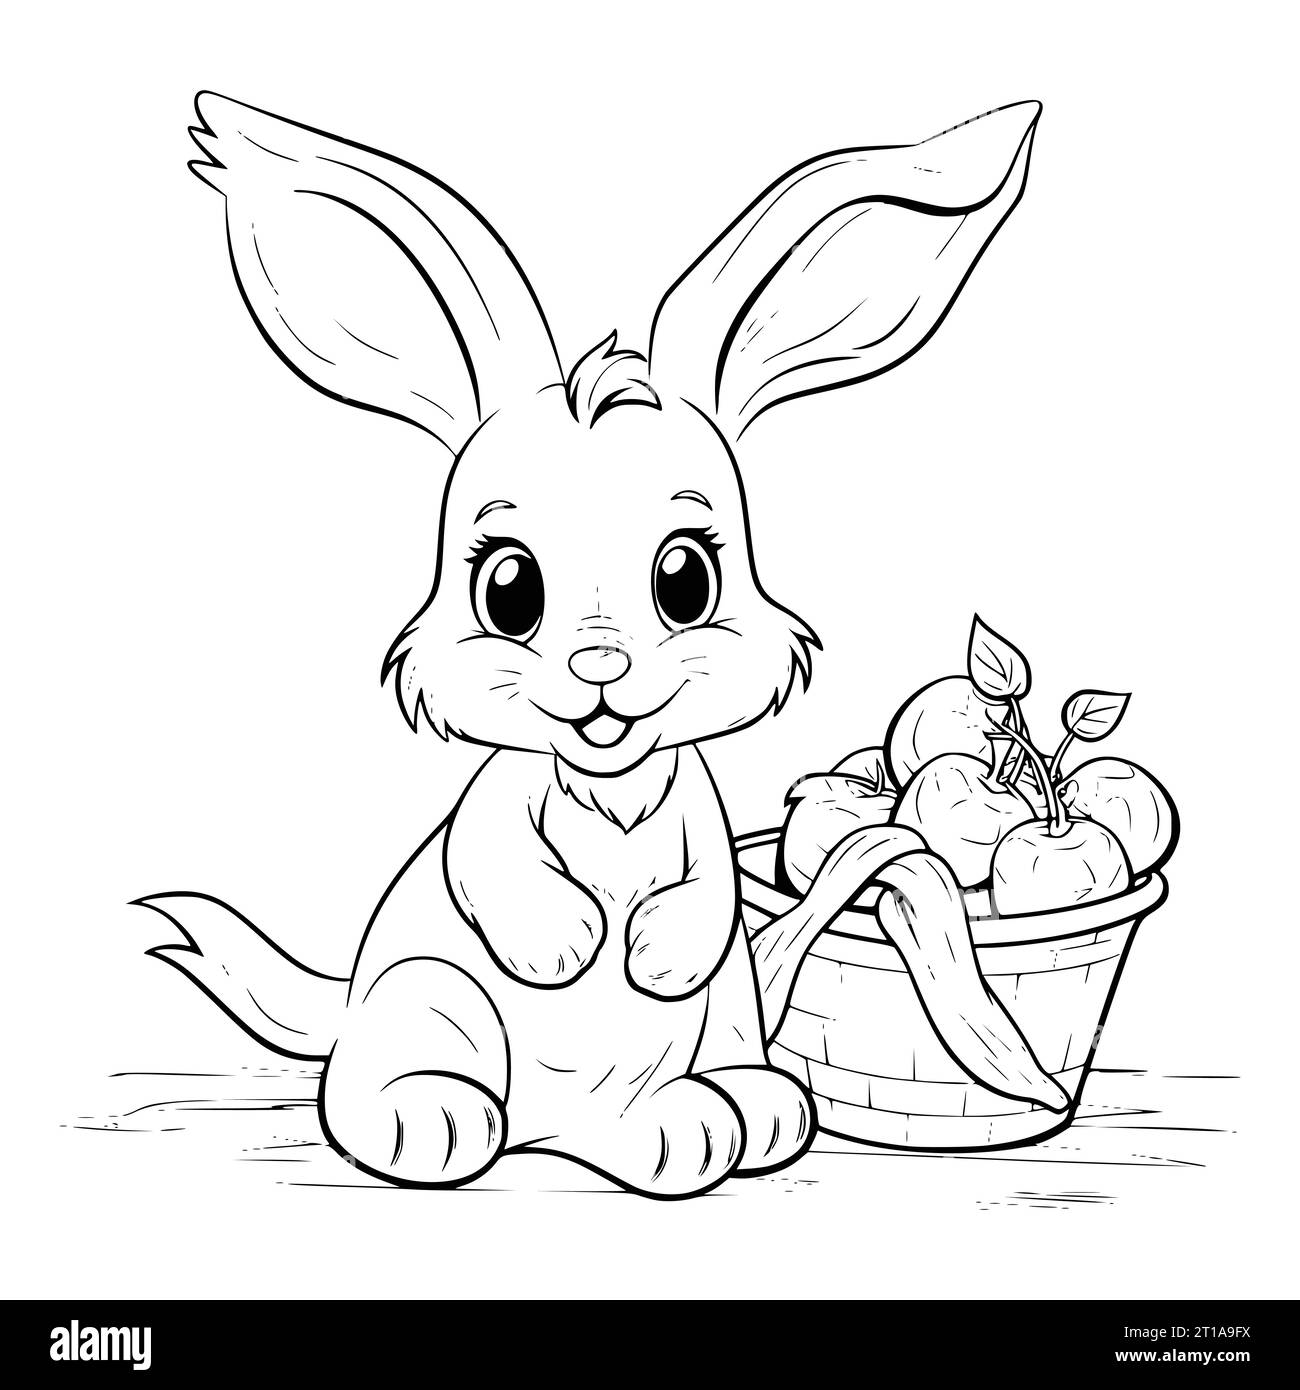 Bunny With A Ripe Tasty Carrot Coloring Page For Kids Stock Vector